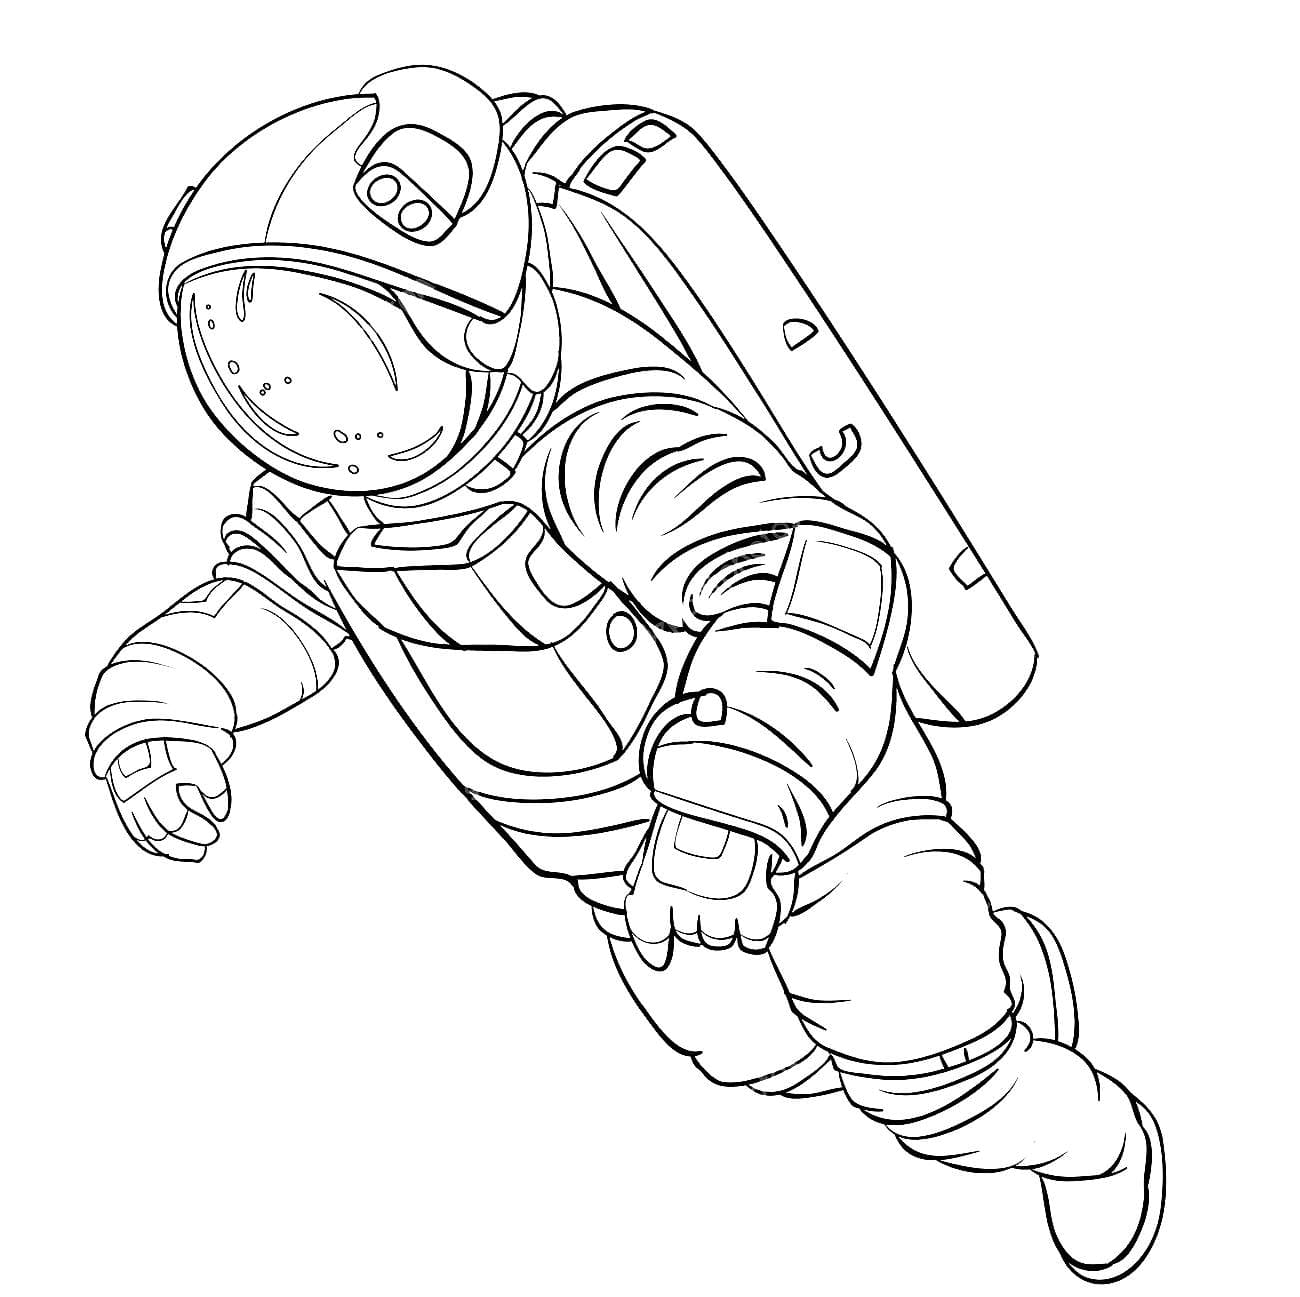 astronaut-coloring-pages-100-coloring-pages-for-kids